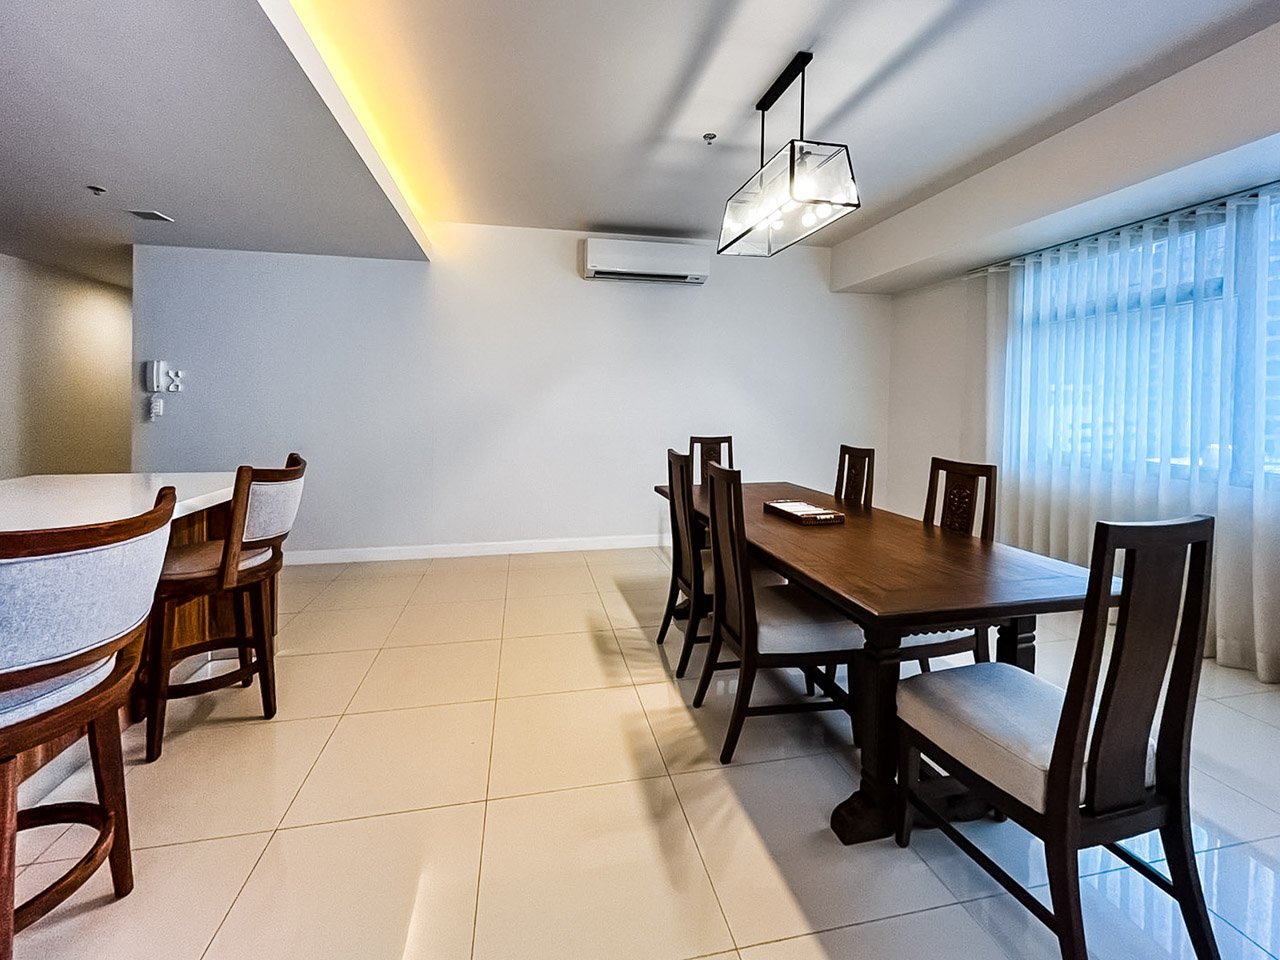 RCALC9 Furnished 2 Bedroom Condo for Rent in Cebu Business Park - 4